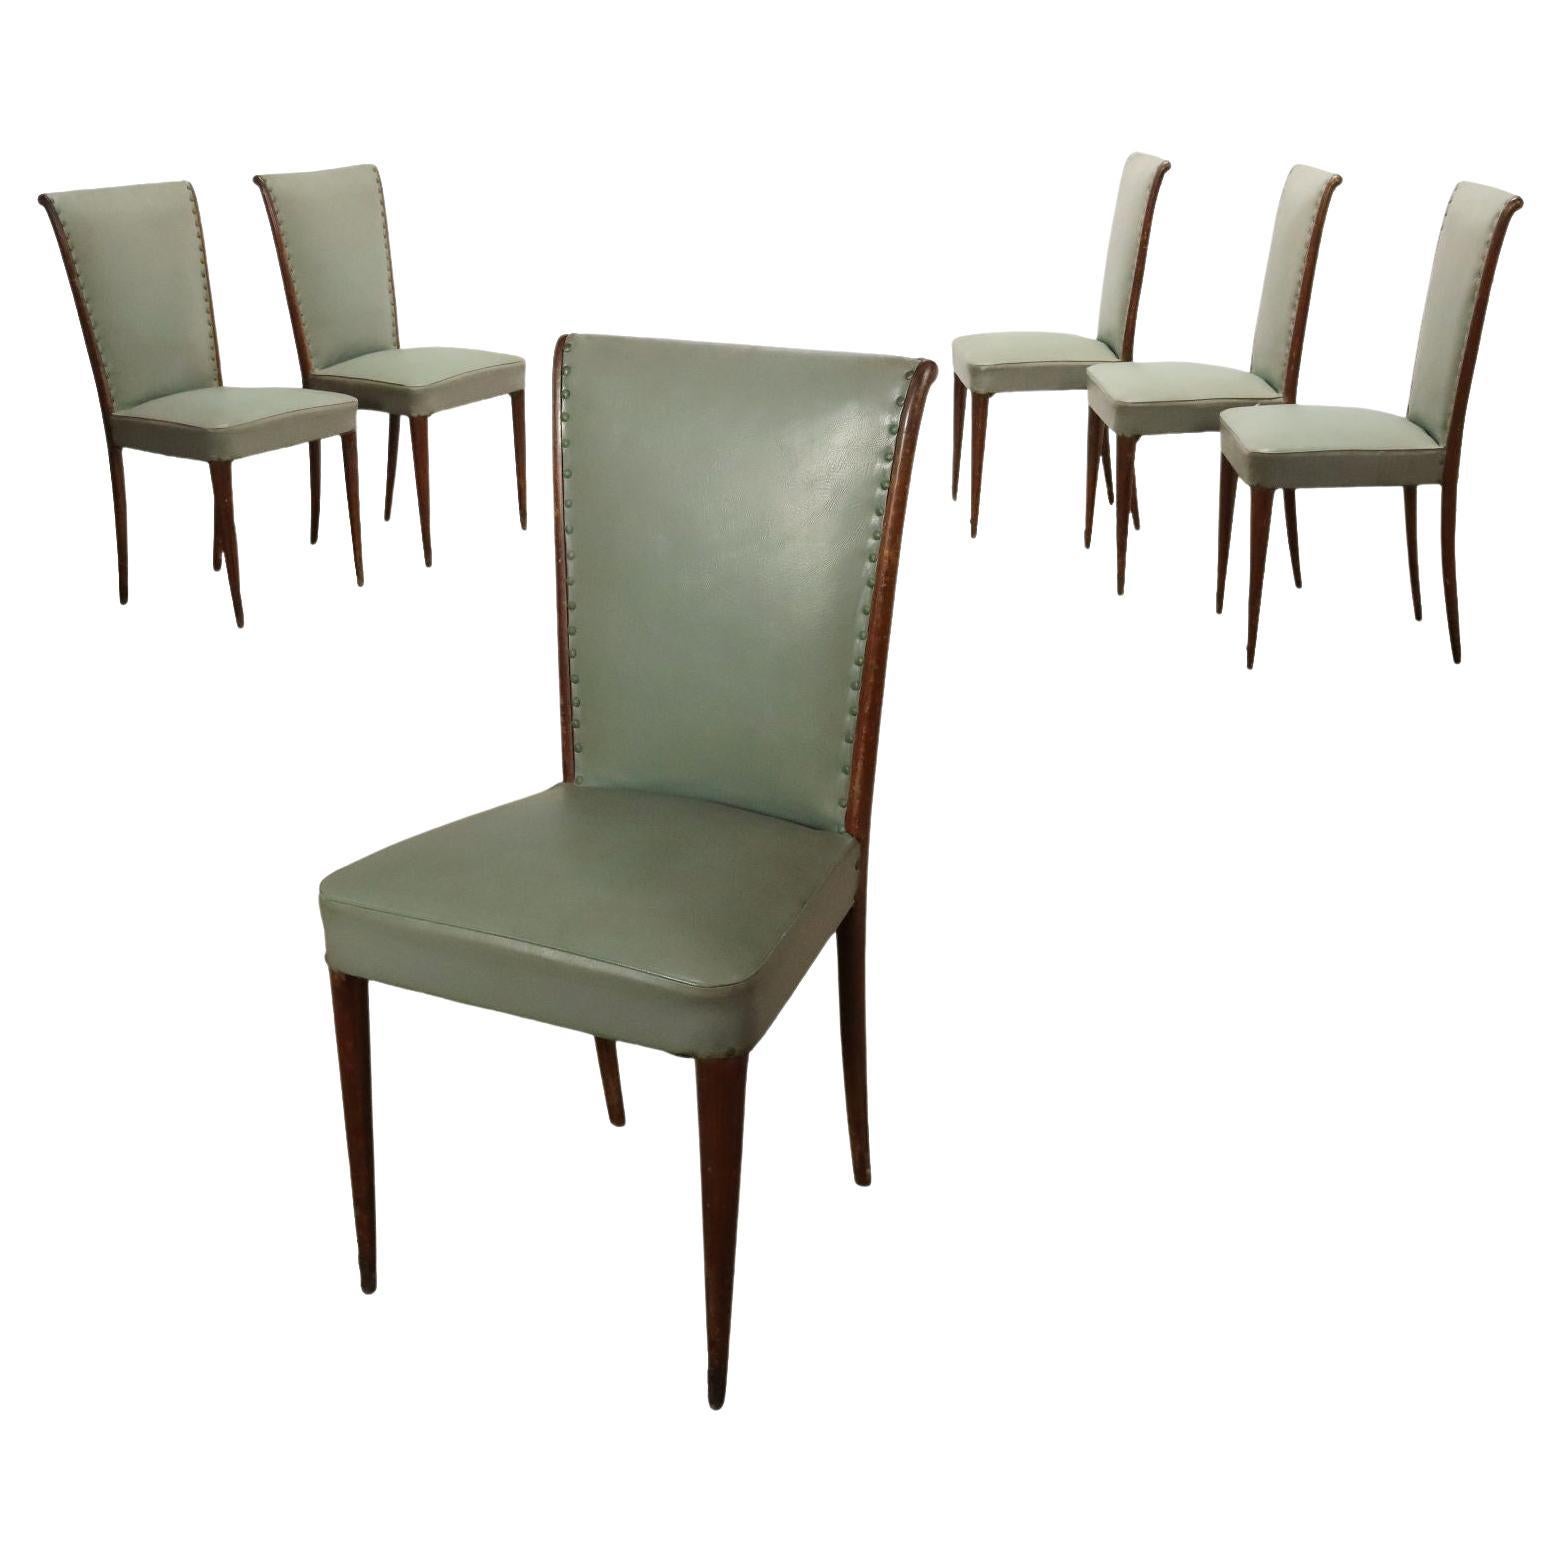 Group of six 1950s Chairs in wood and sage green leatherette For Sale